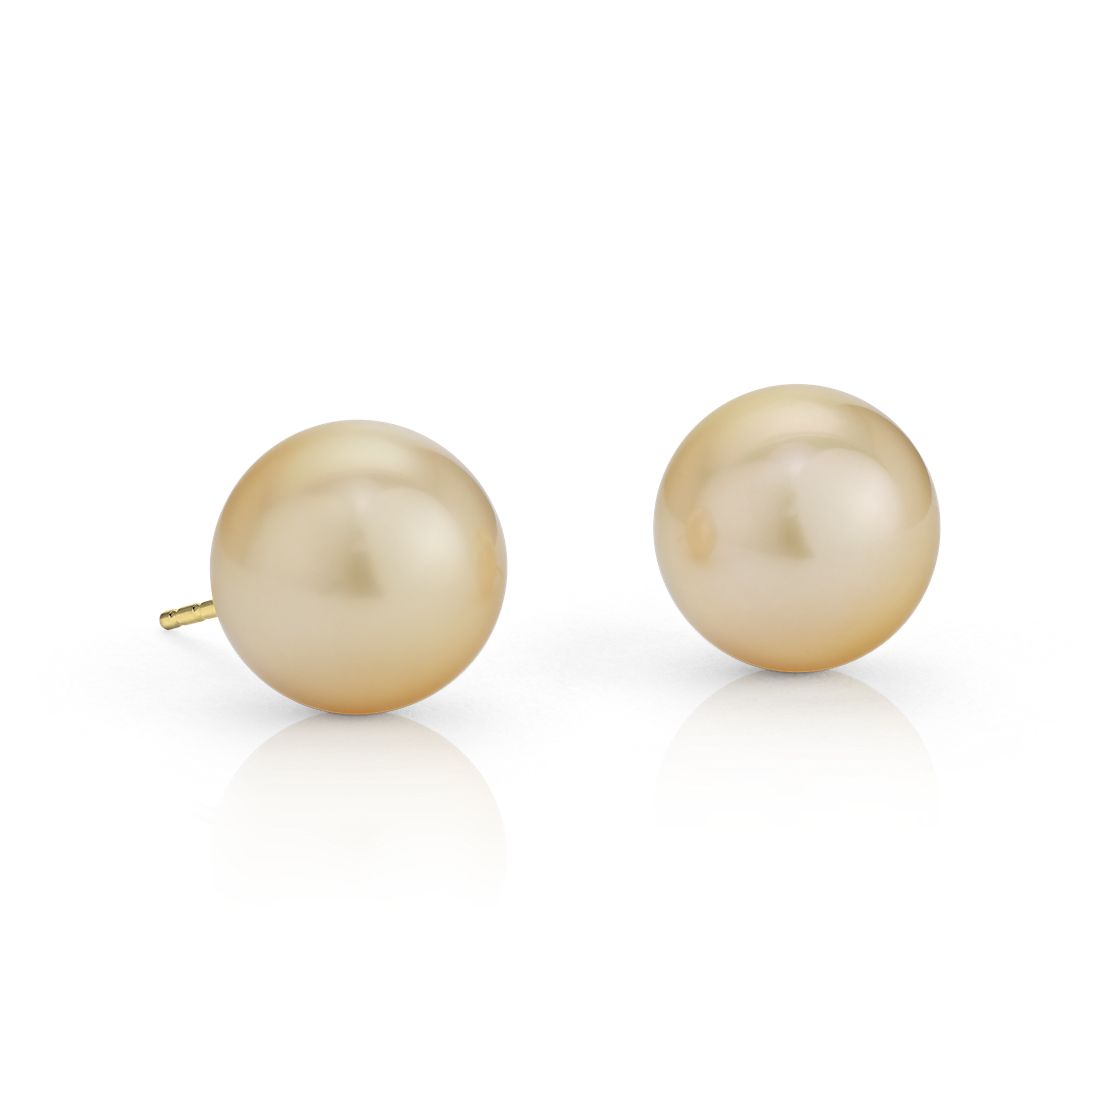 Golden South Sea Cultured Pearl Stud Earrings in 18k Yellow Gold (11-12mm)